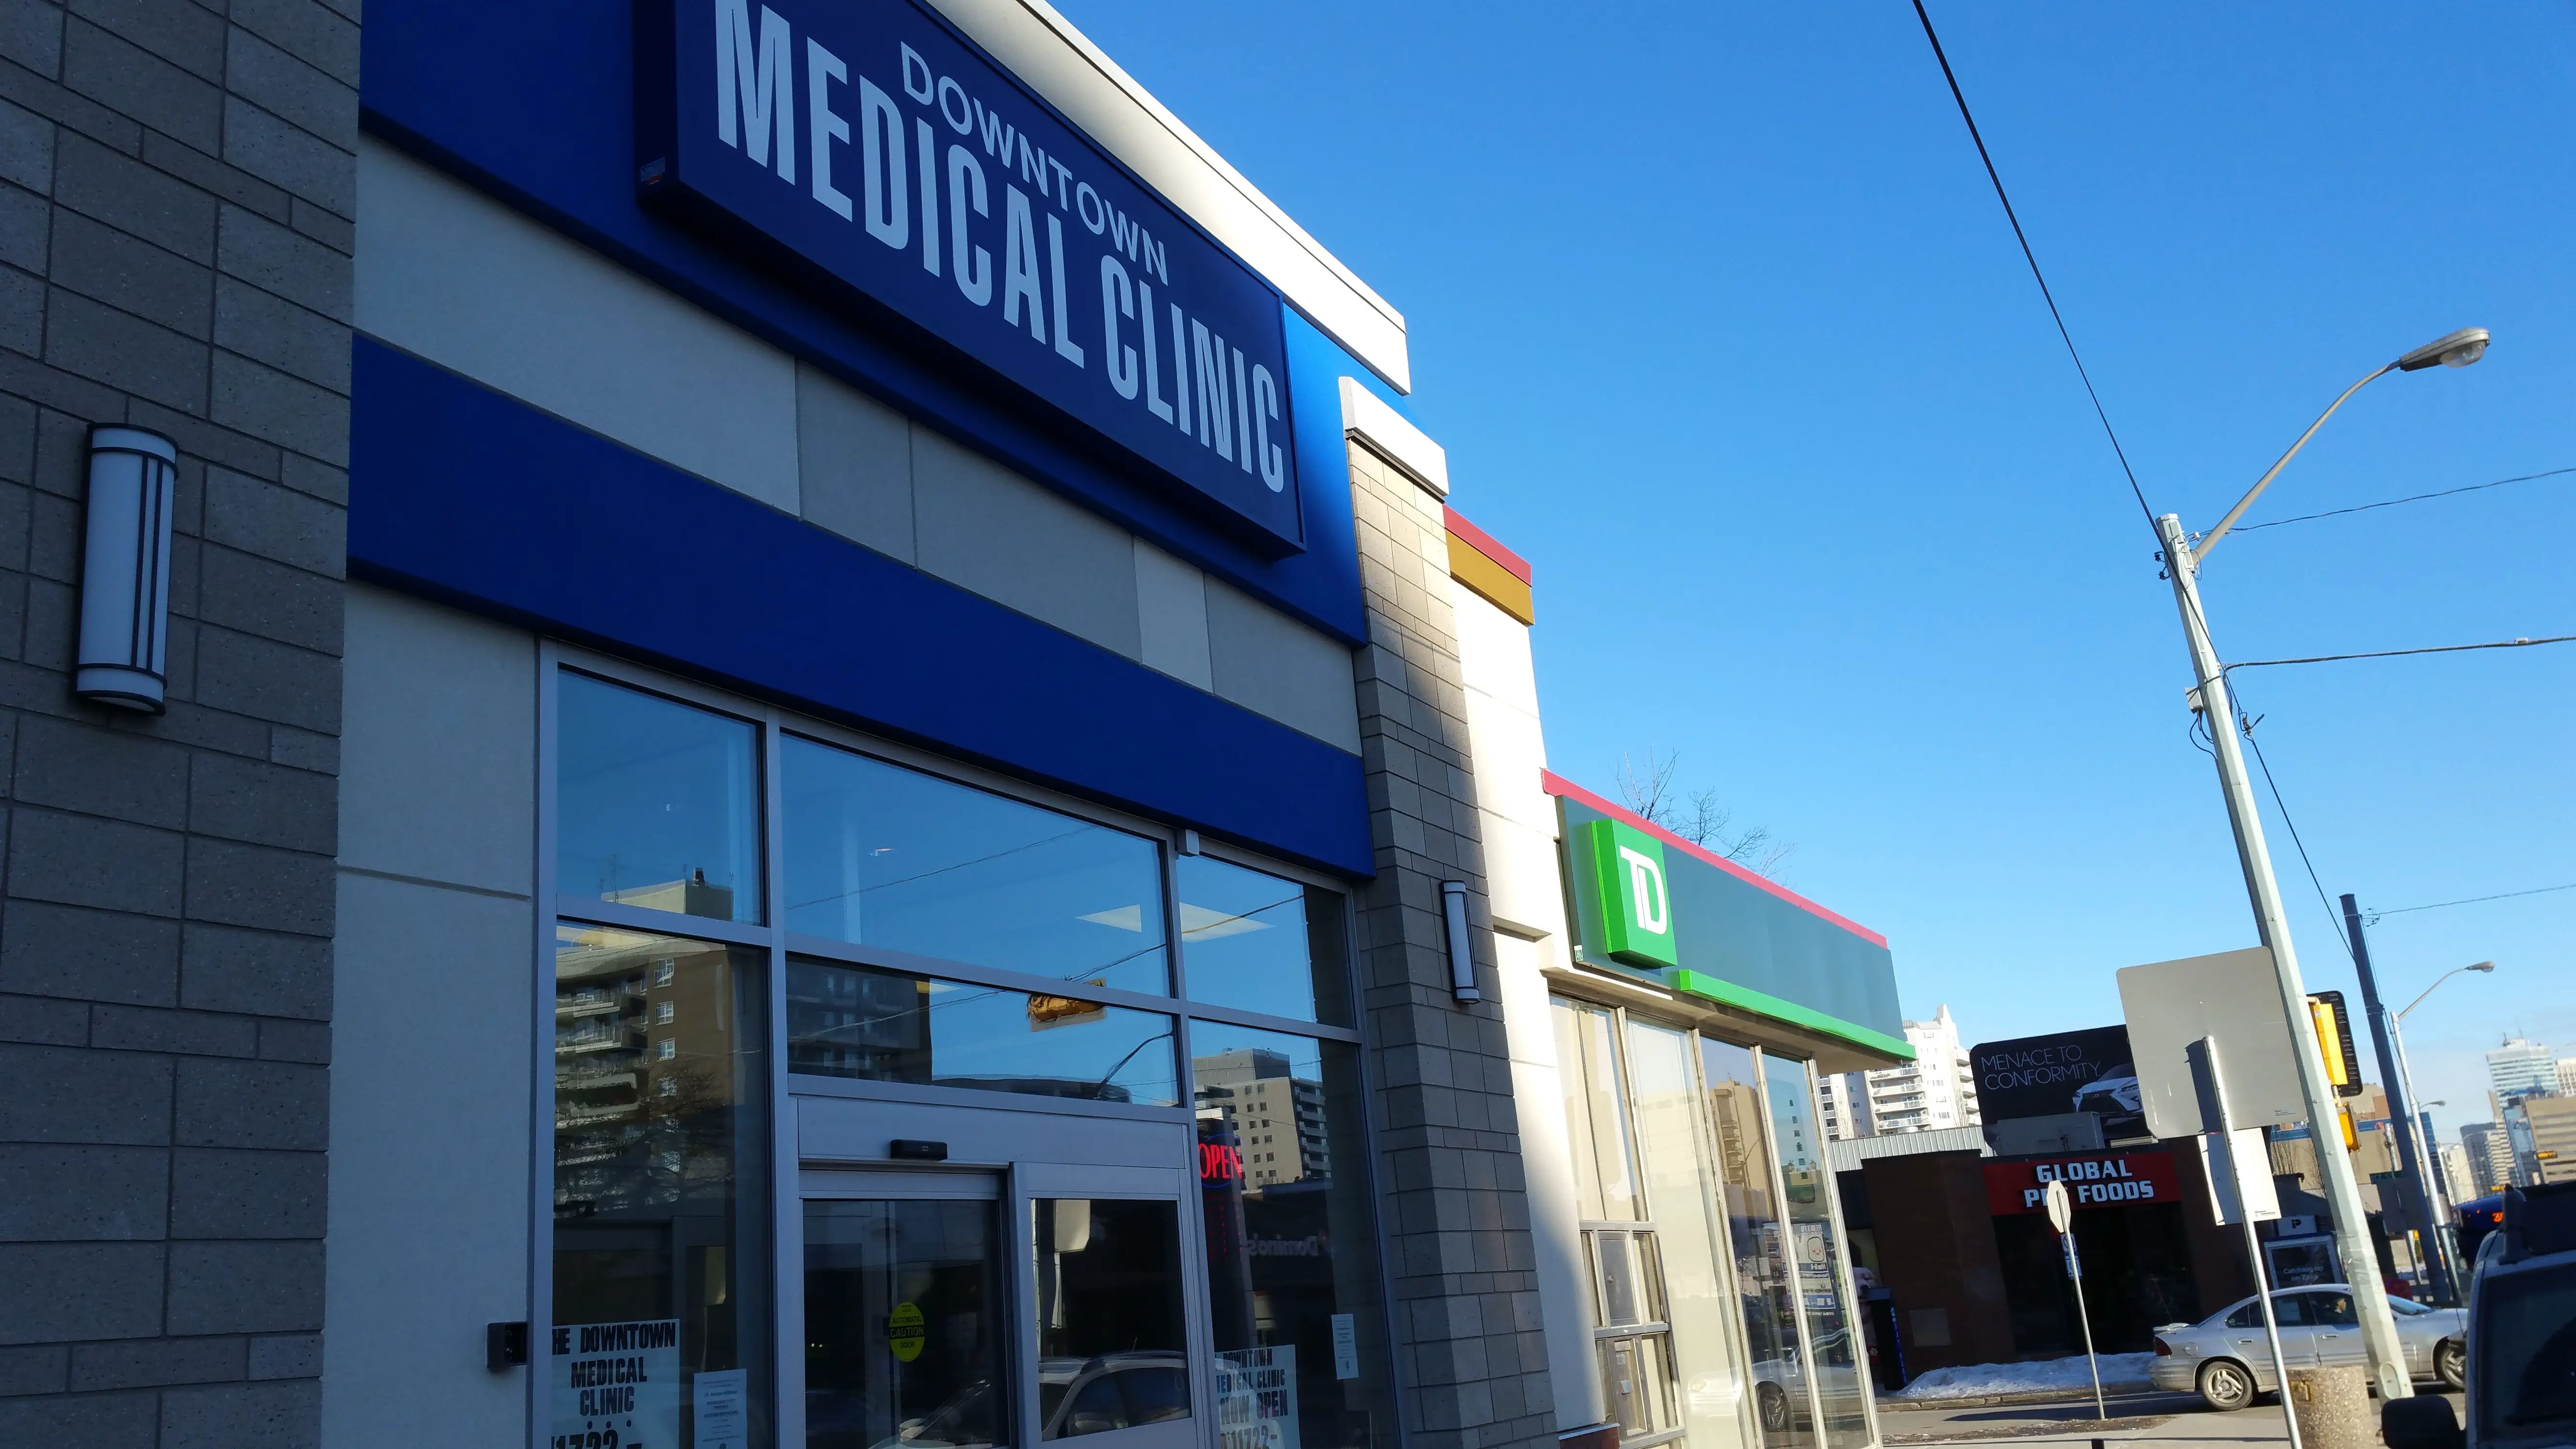 Downtown Medical Clinic